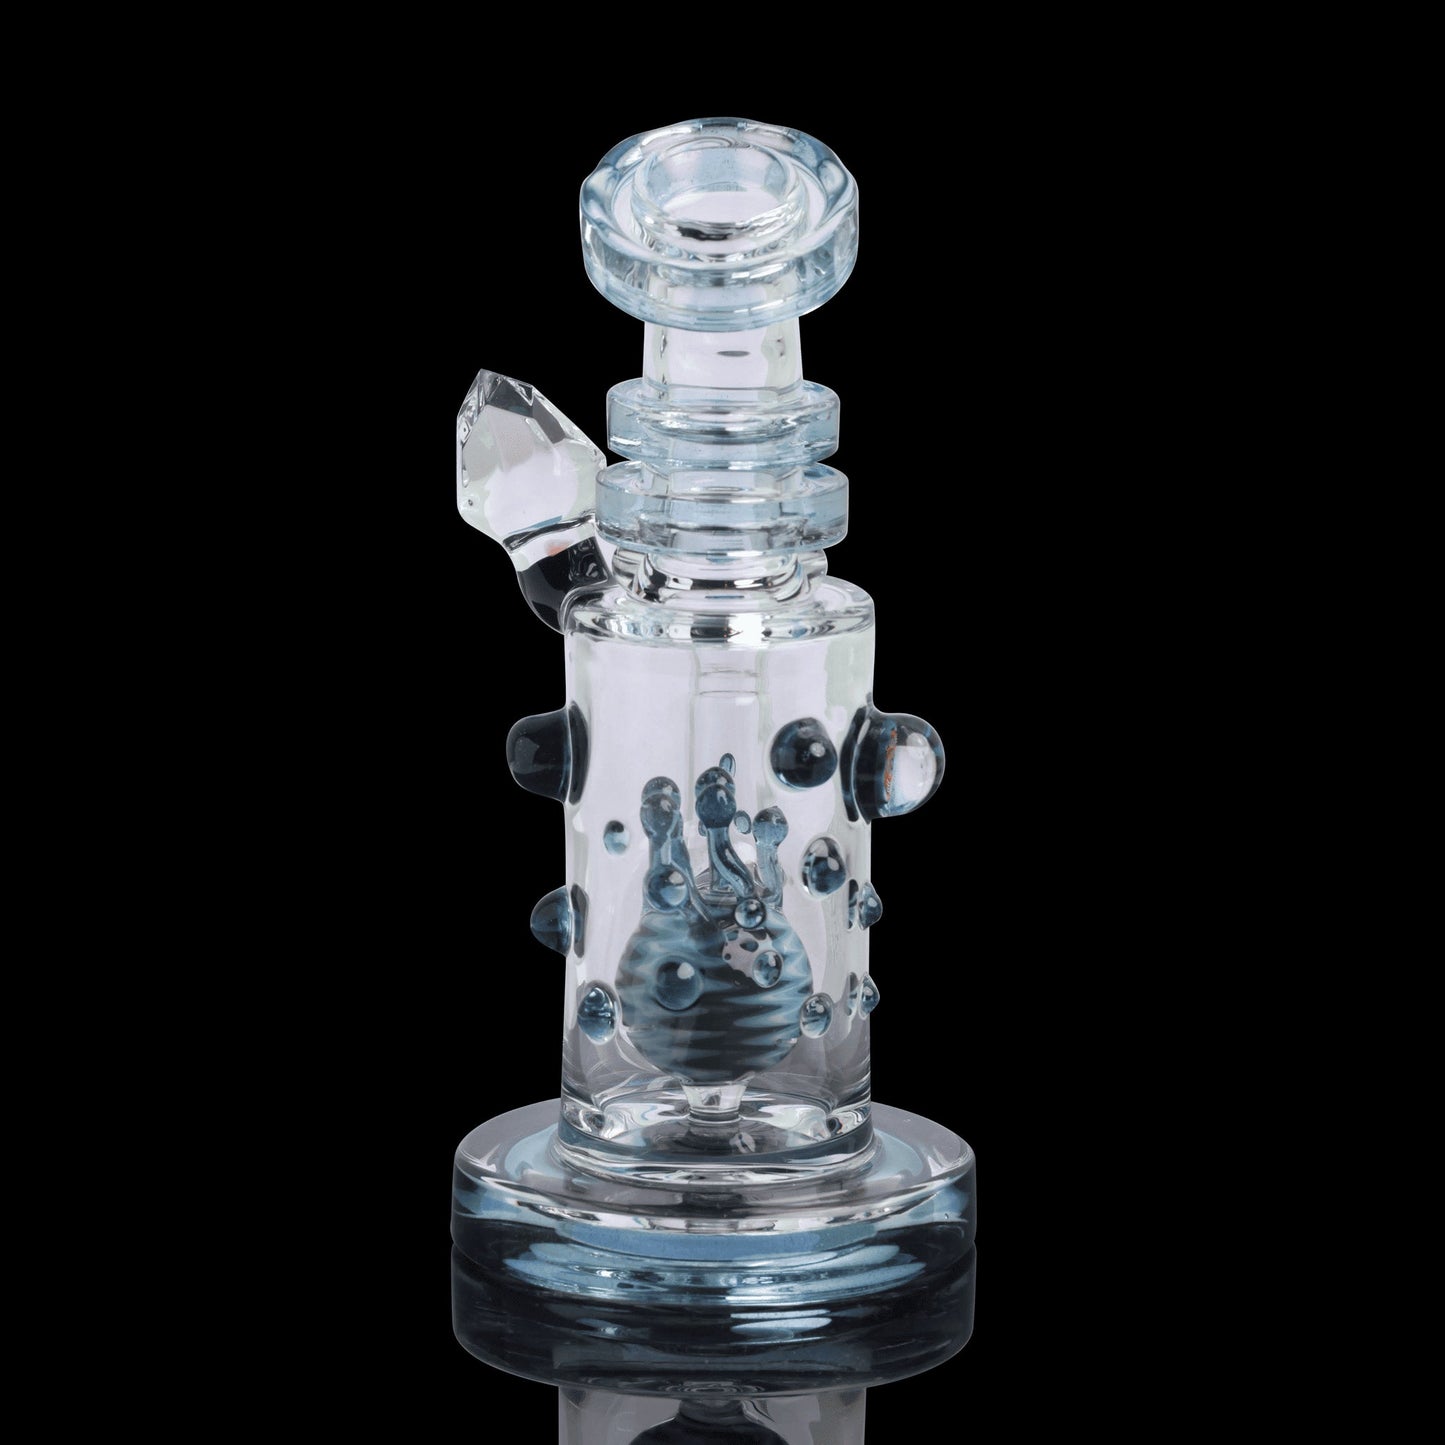 exquisite design of the Heady Facet Rig by Chris Hubbard